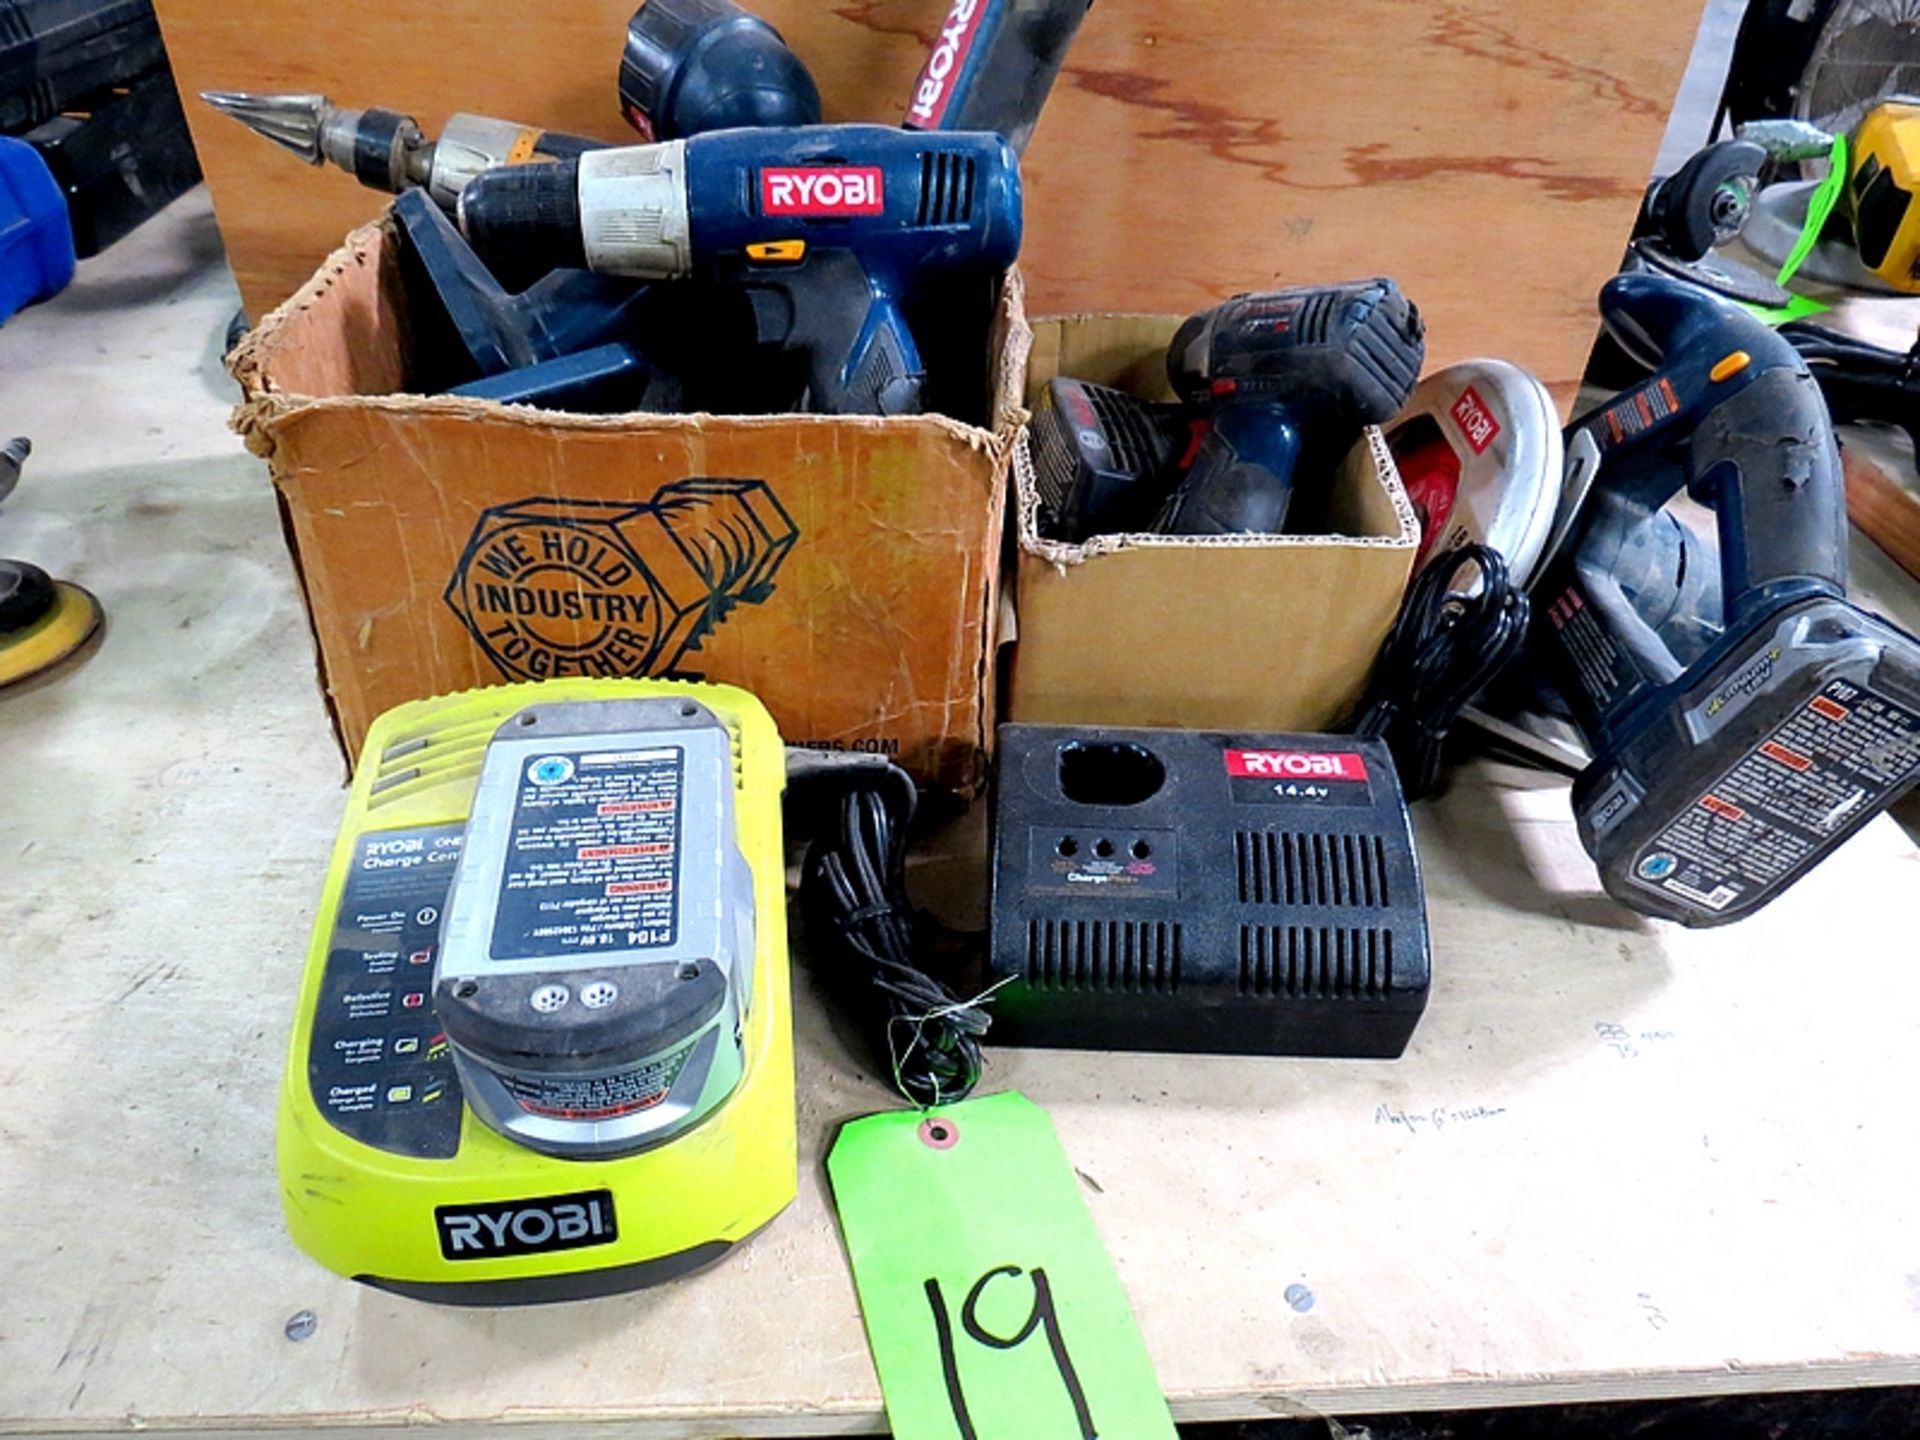 LOT OF ASSORTED CORDLESS RYOBI AND BOSCH DRILLS MISSING SOME BATTERIES AND CHARGERS